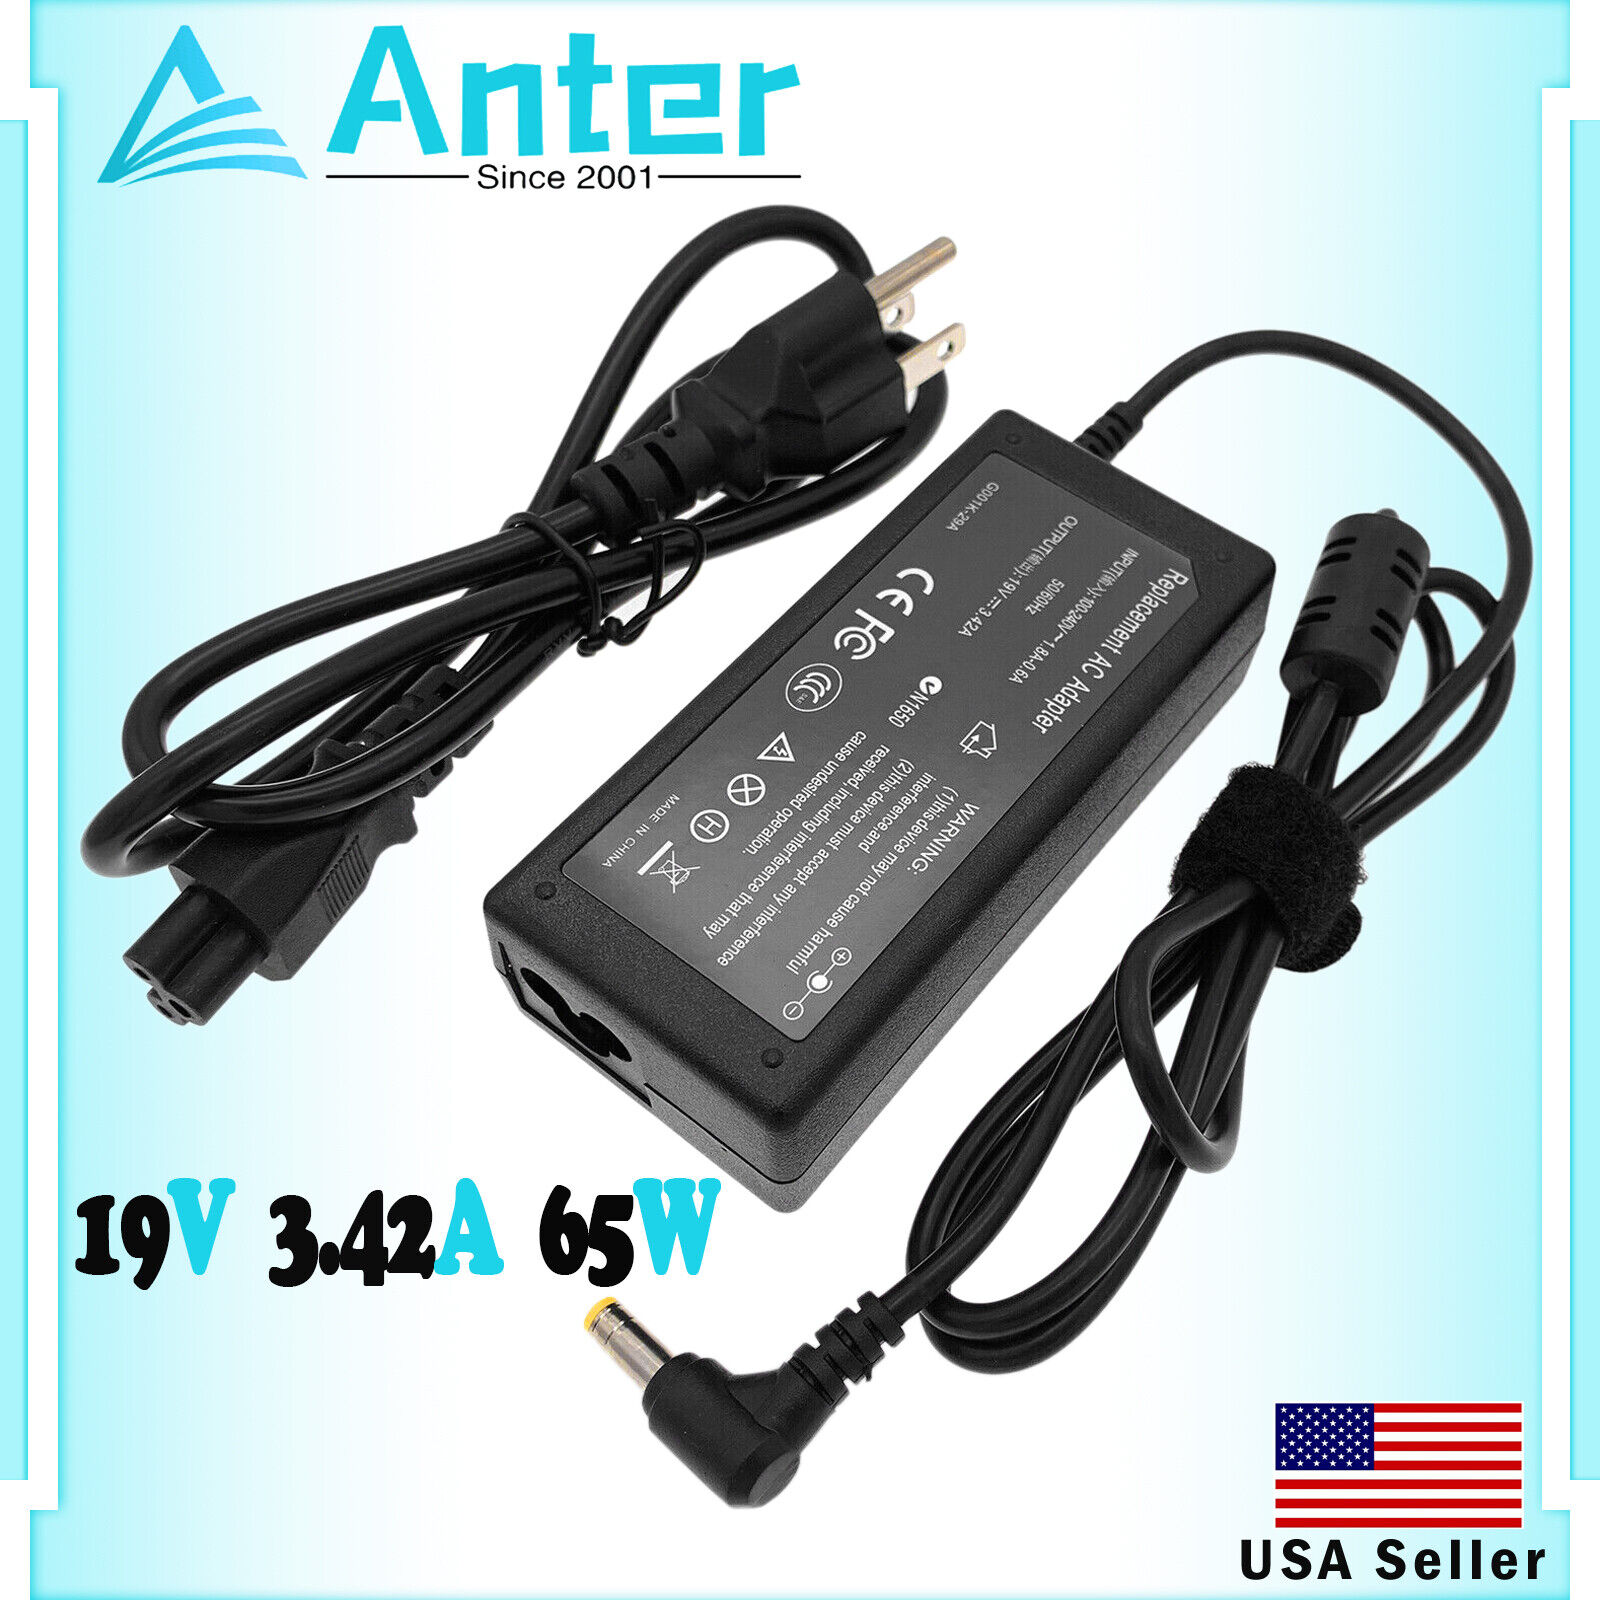 65W Laptop Power Supply Adapter Charger for Asus S400 S400C S400CA S400CA-DH51